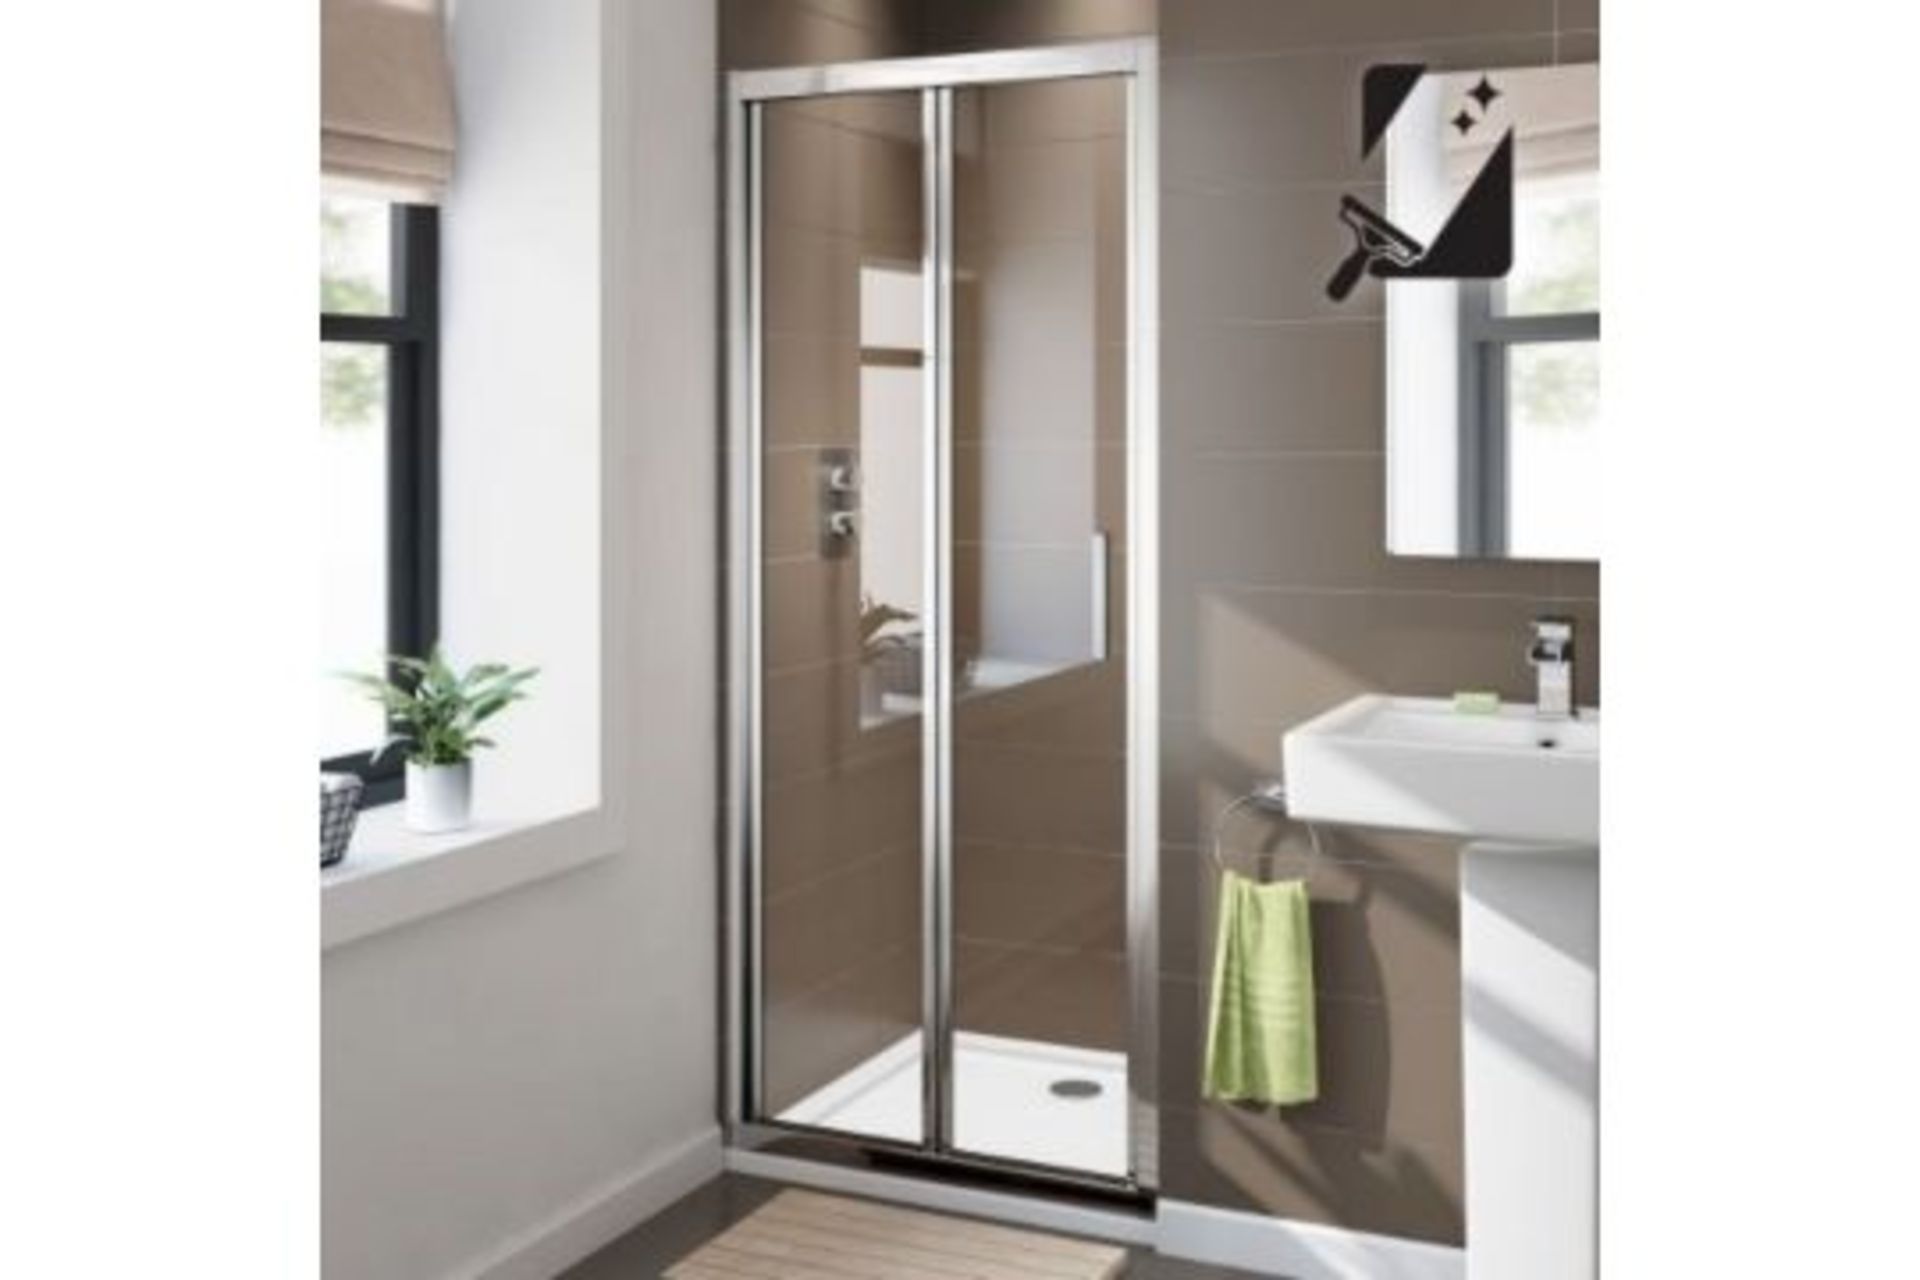 New Twyford's 700mm - 8mm - Premium Easy Clean Bifold Shower Door. RRP £379.99.Durability To ... - Image 2 of 2